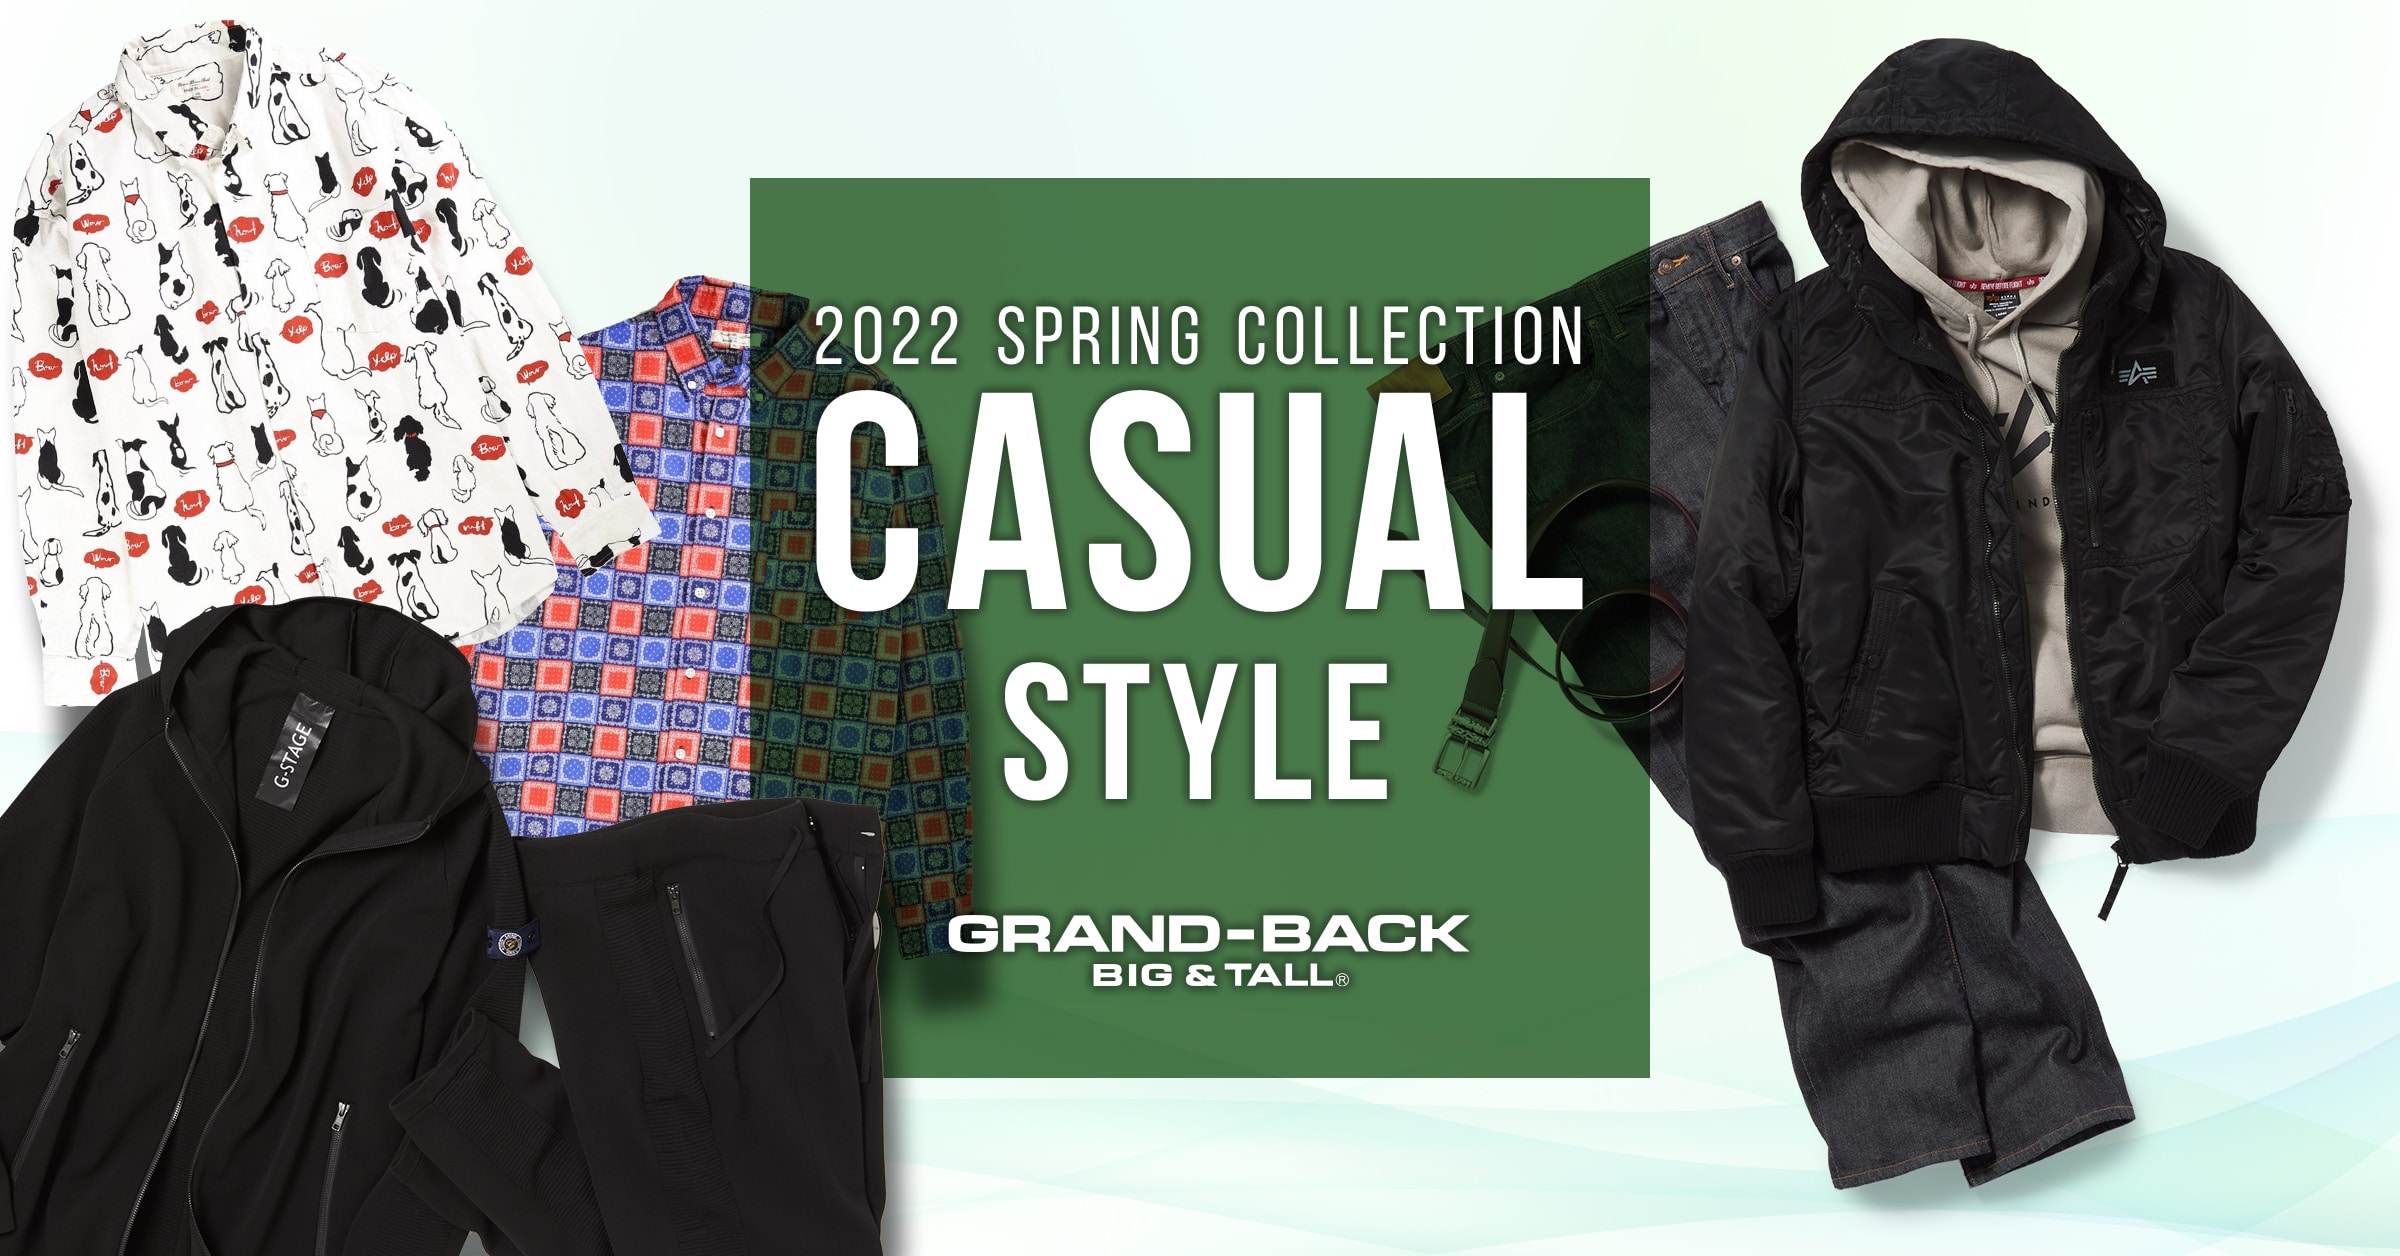 2022 SPRING CASUAL COLLECTION